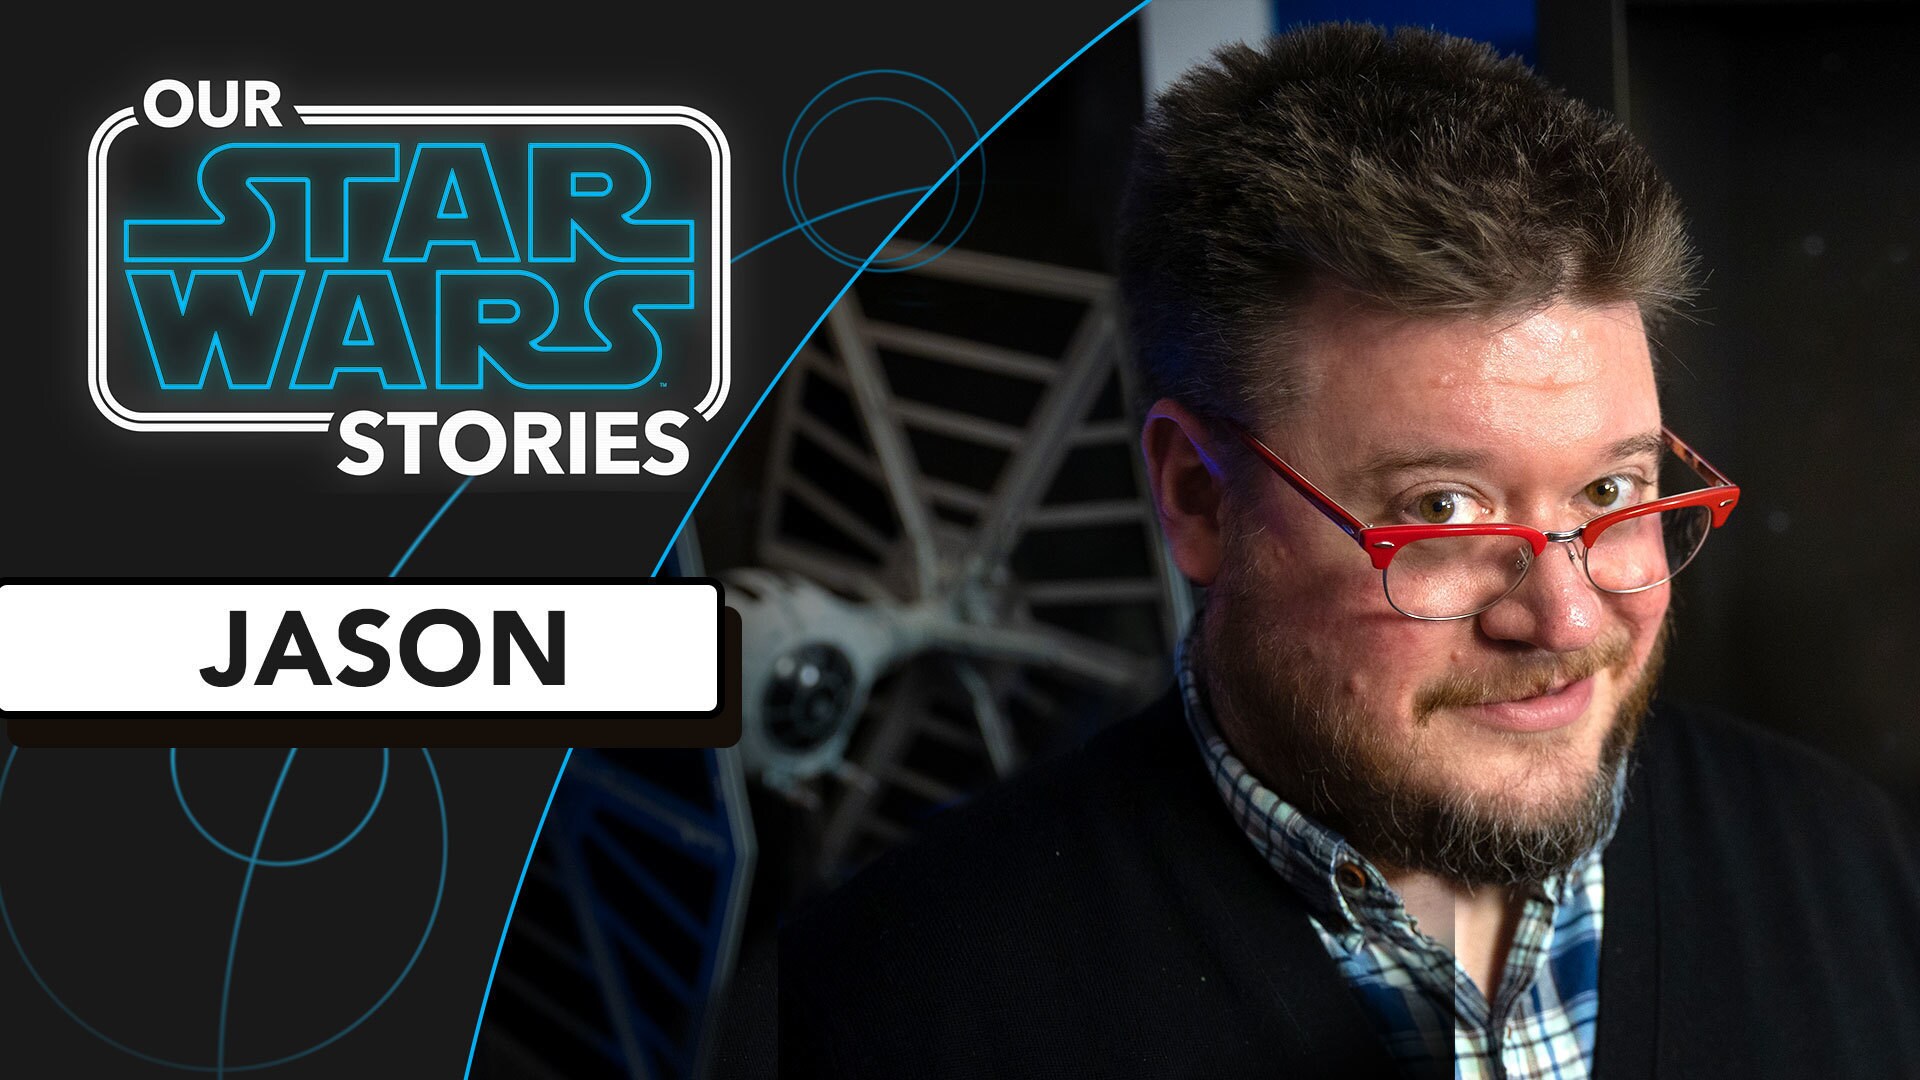 Jason Eaton and His Incredible Star Wars Models | Our Star Wars Stories